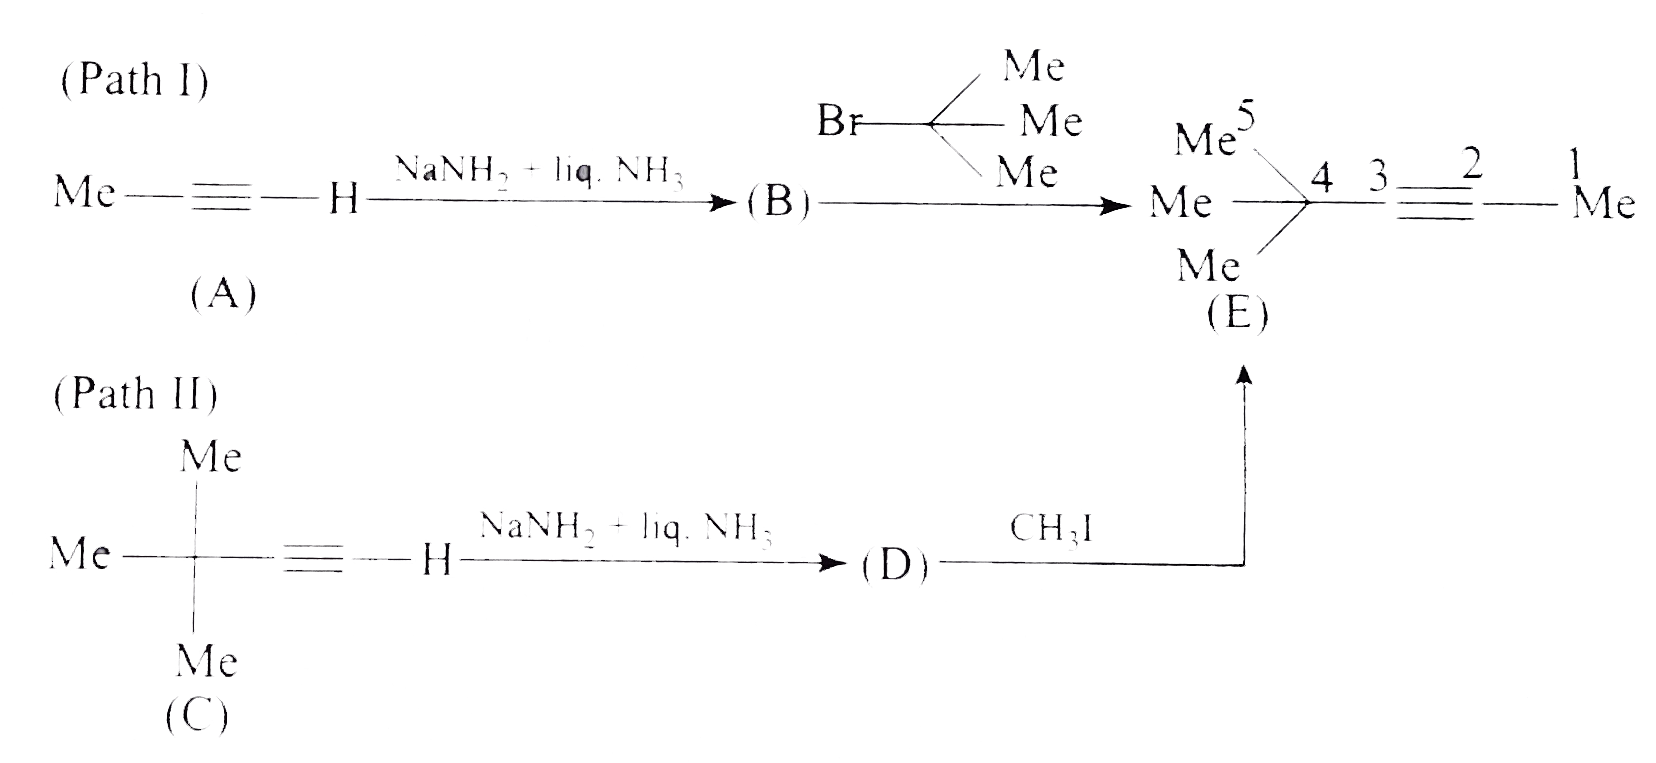 Explain which path is feasible for the preparaation of compound 4, 4-Dimethyl pent-2-yne (E).